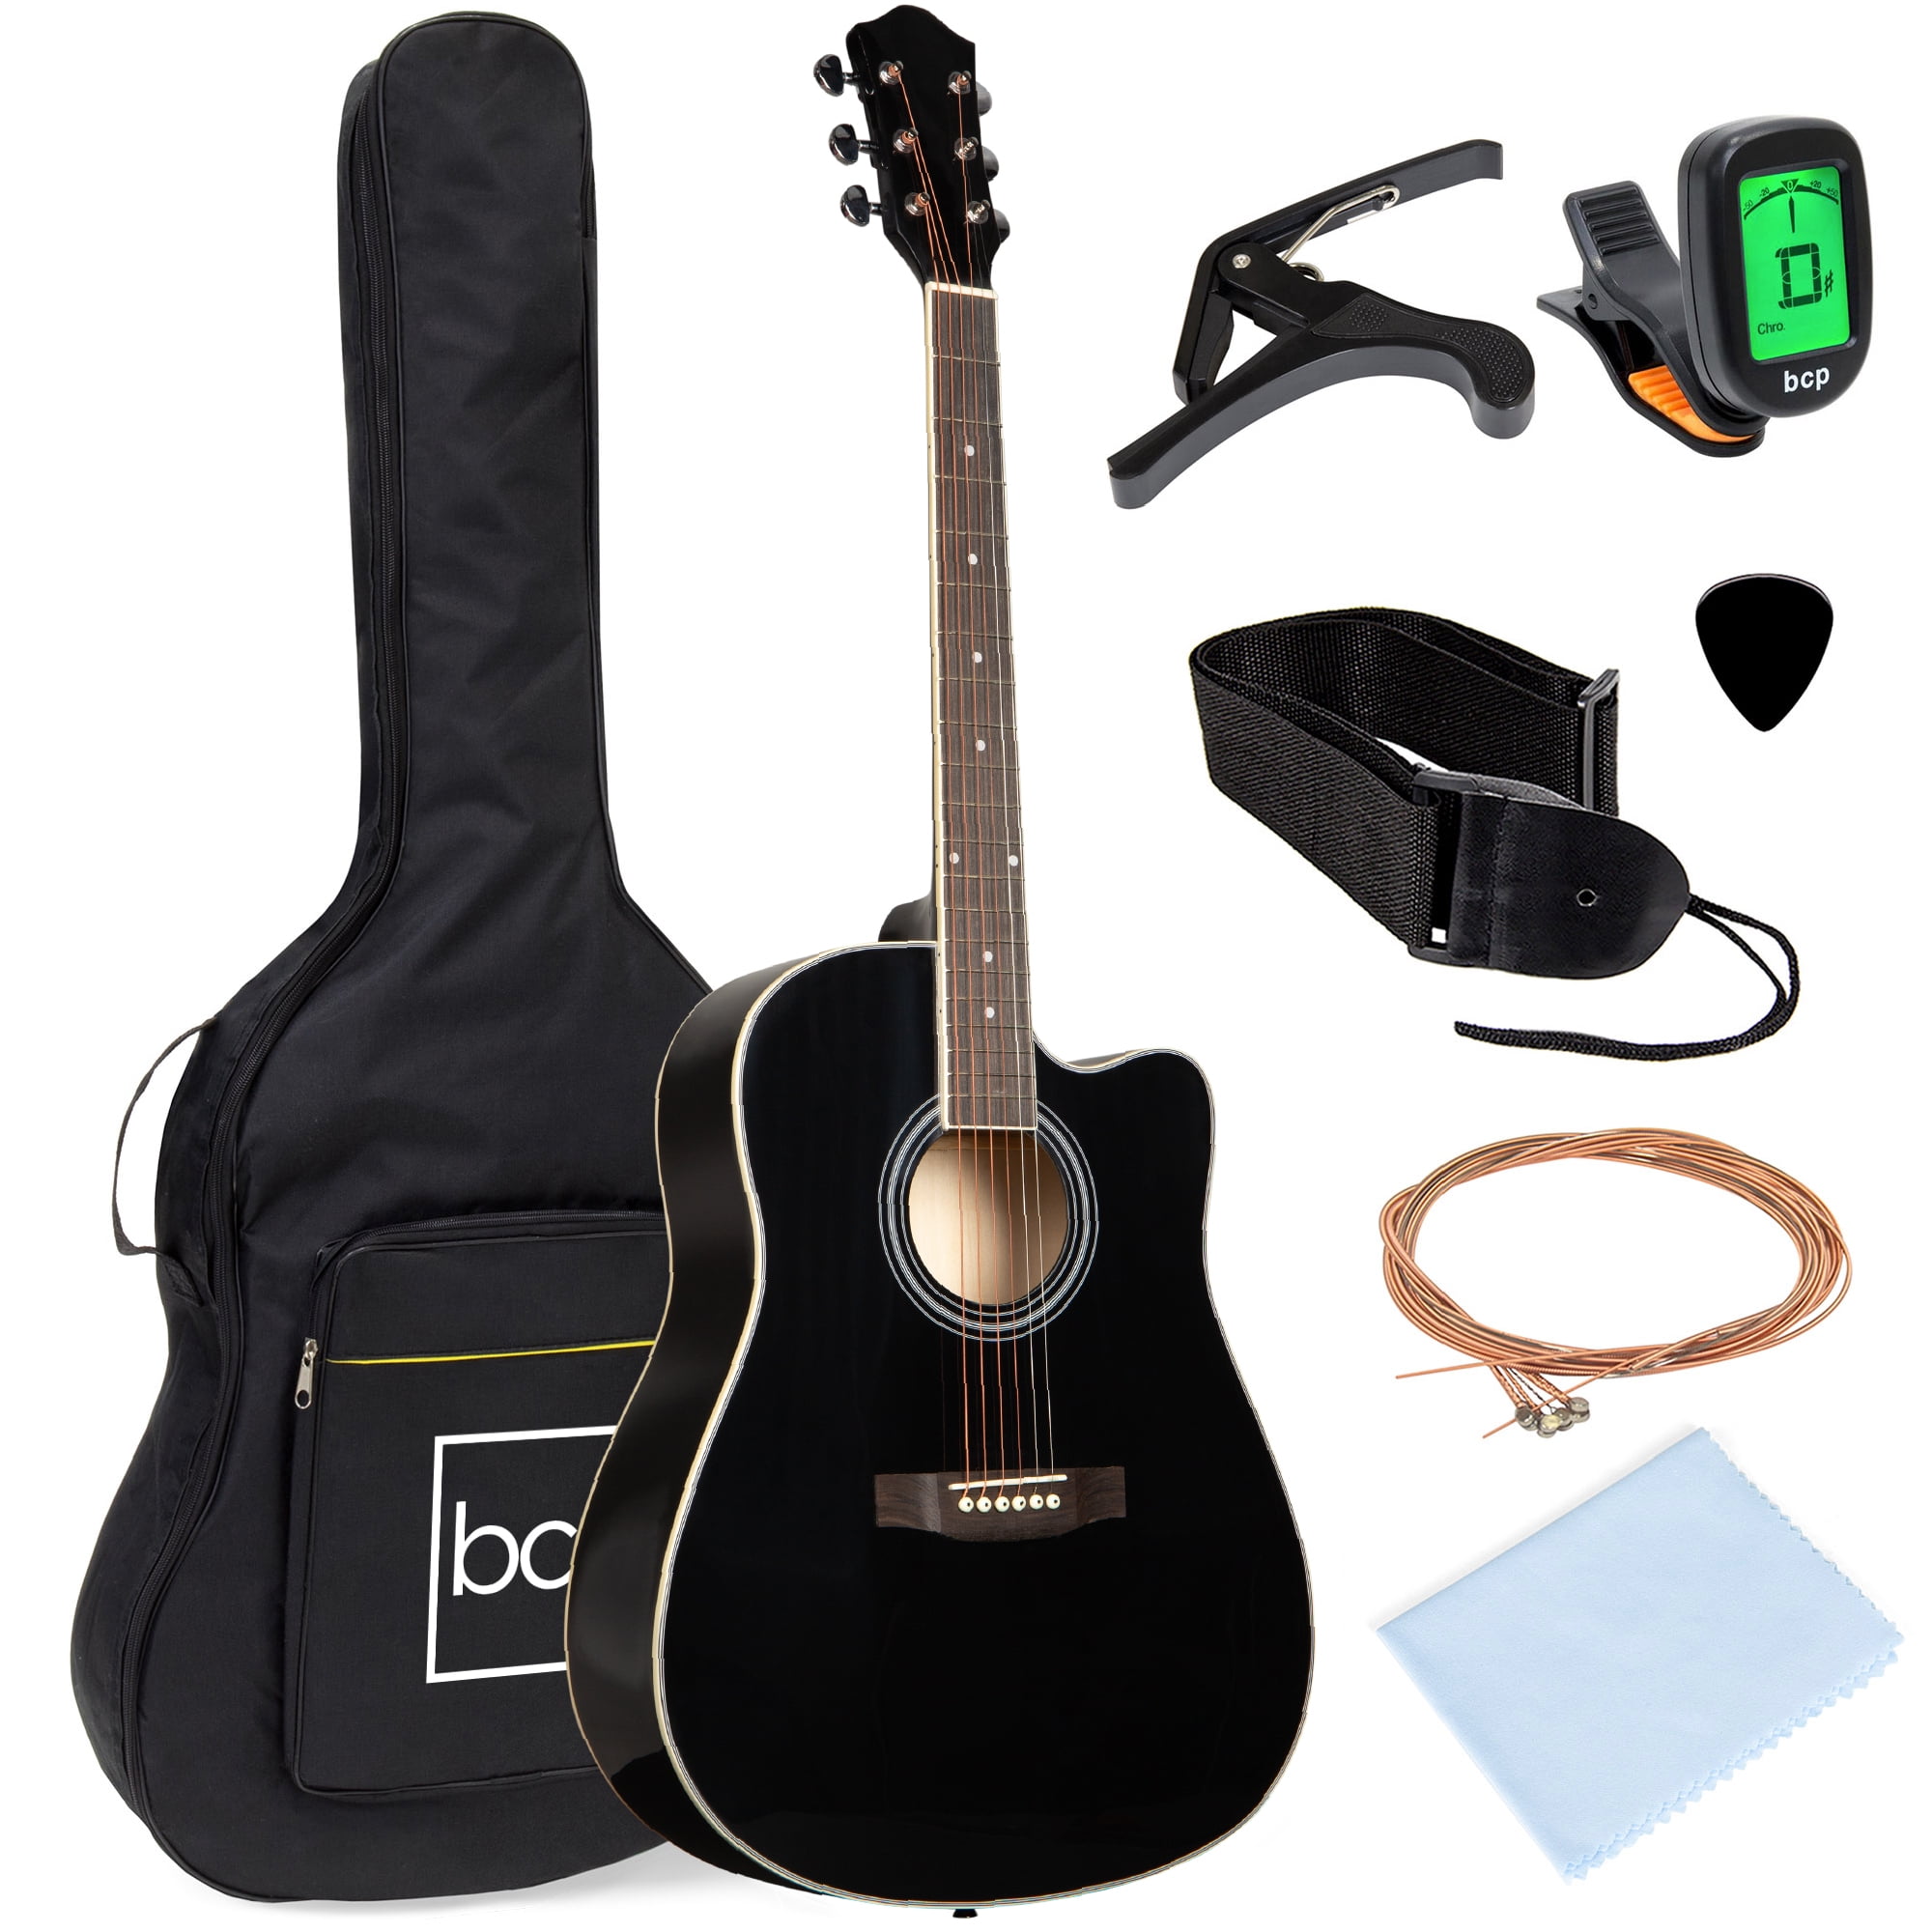 Best Choice Products 41in Full Size Beginner Acoustic Guitar Set with Case, Strap, Capo, Strings, Tuner - Black